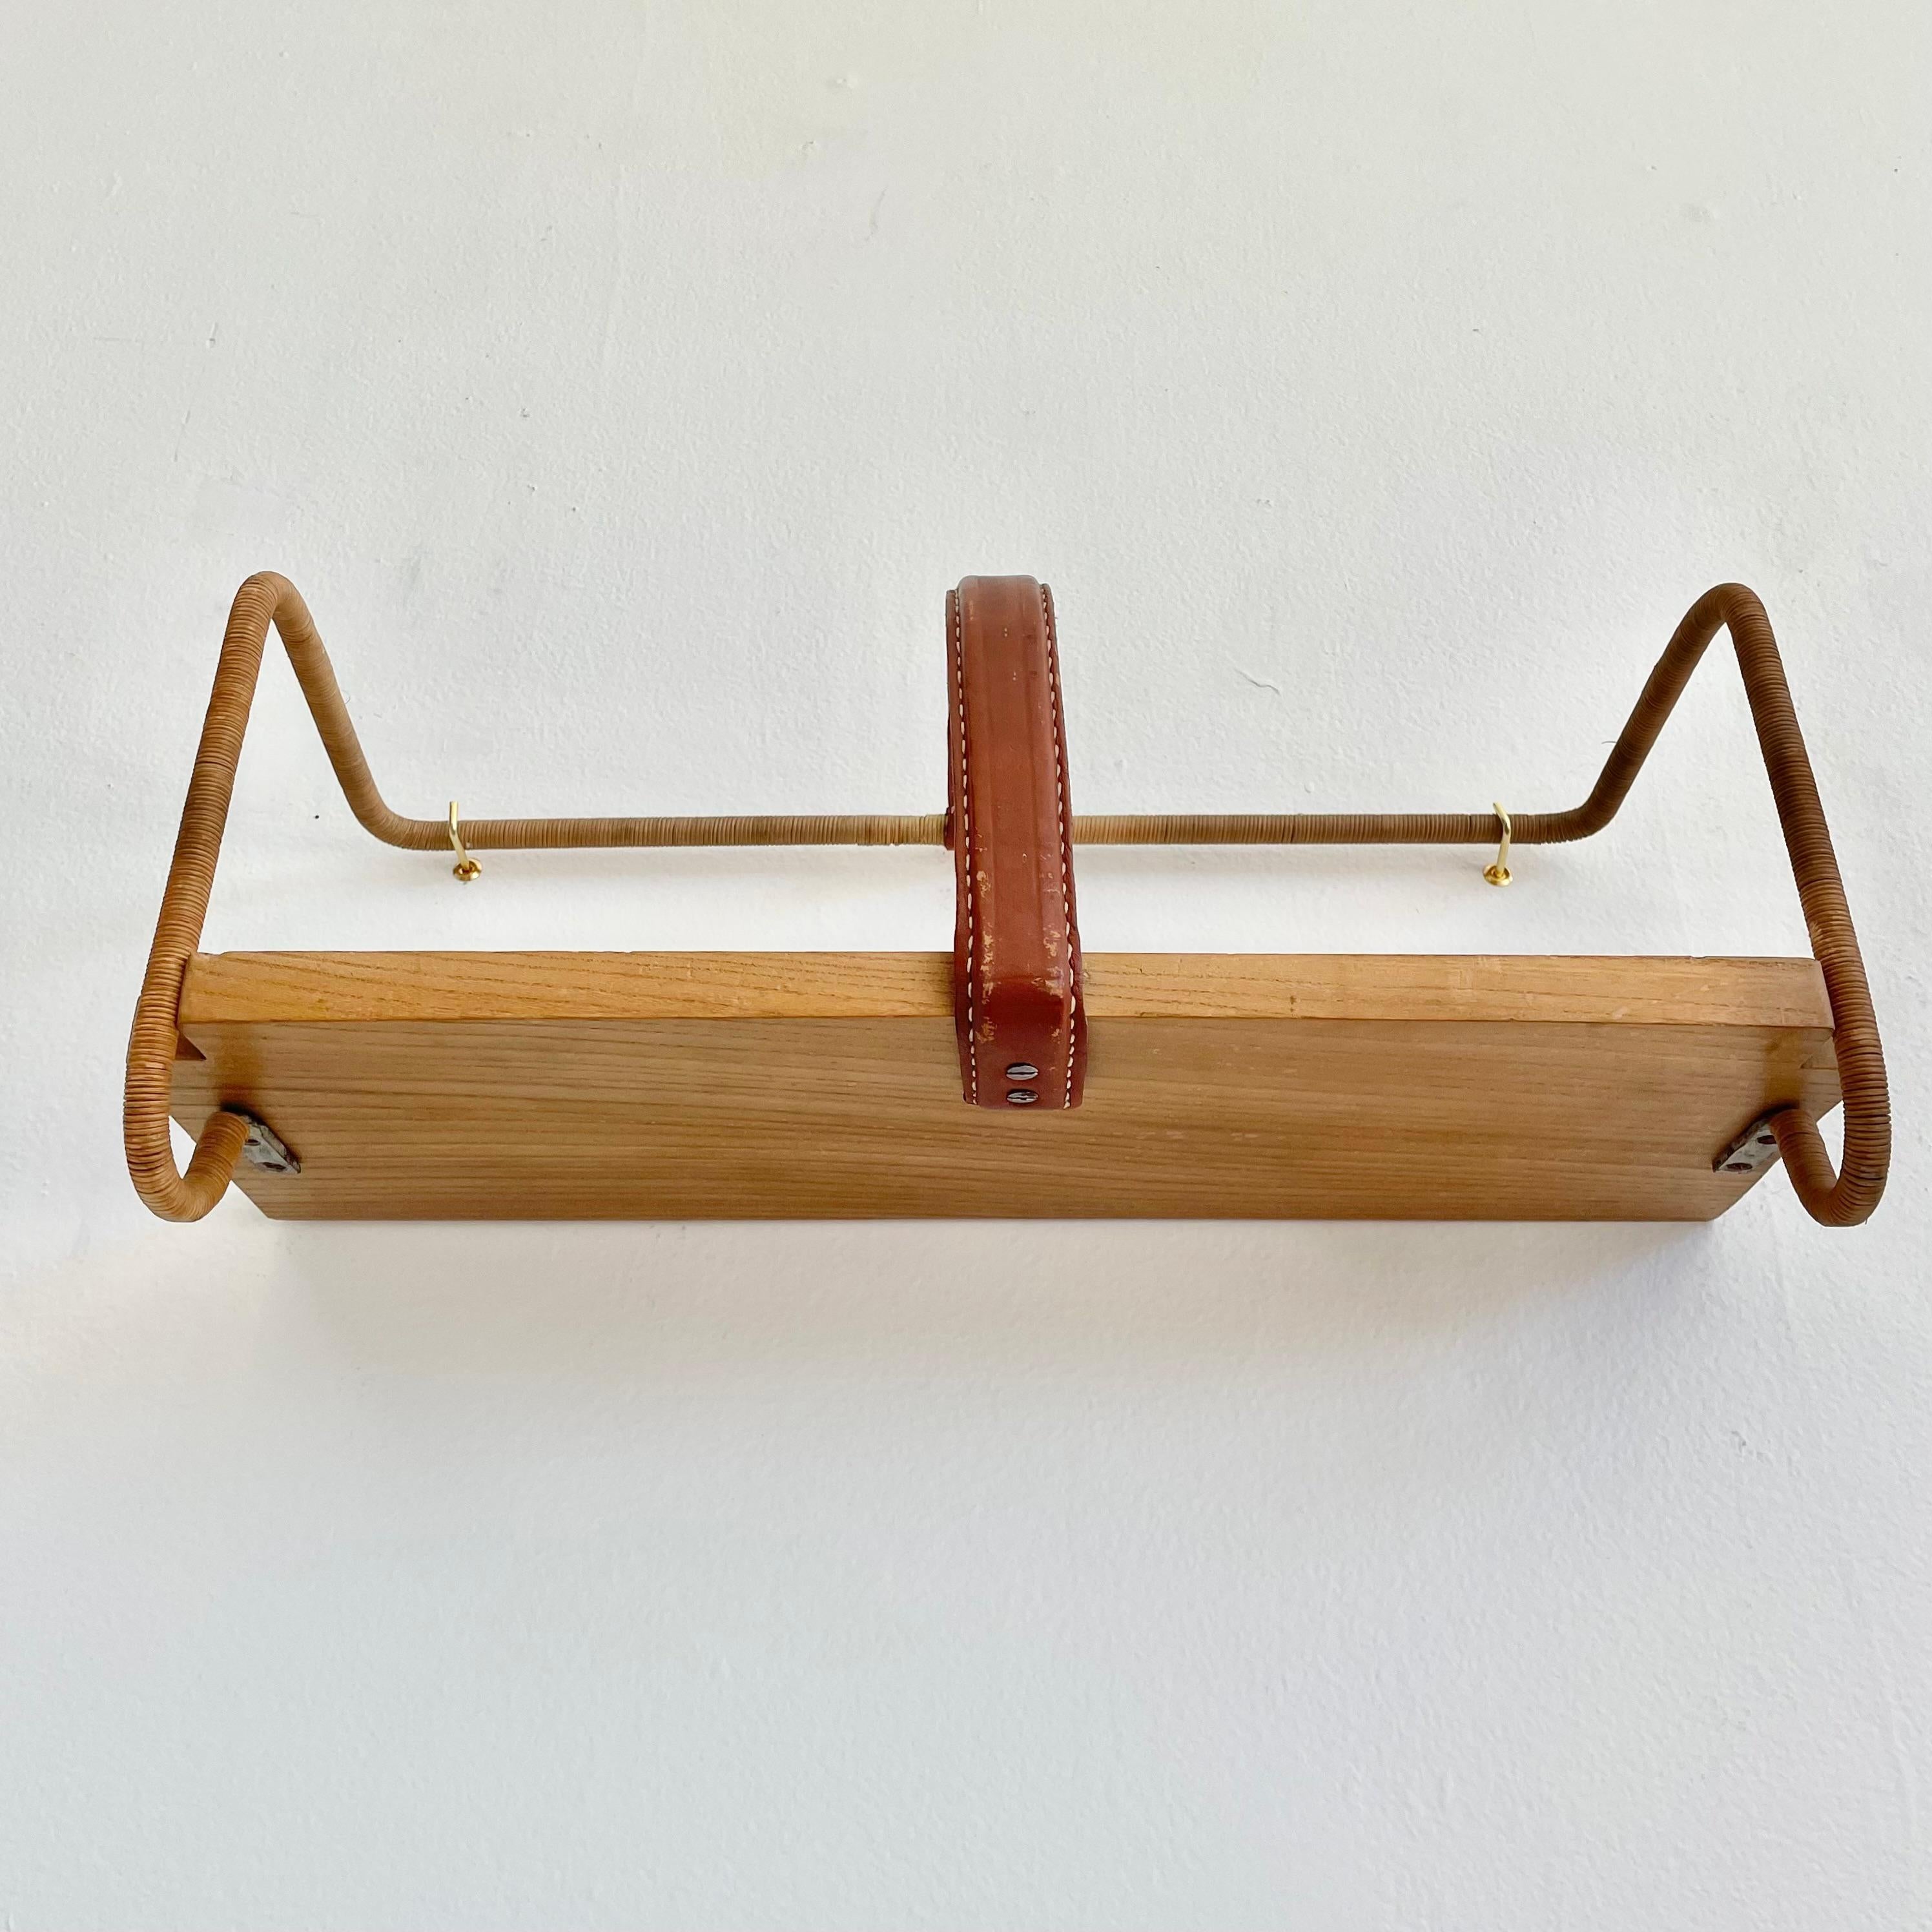 Jacques Adnet Leather, Wood and Twine Shelf, 1950s France For Sale 2